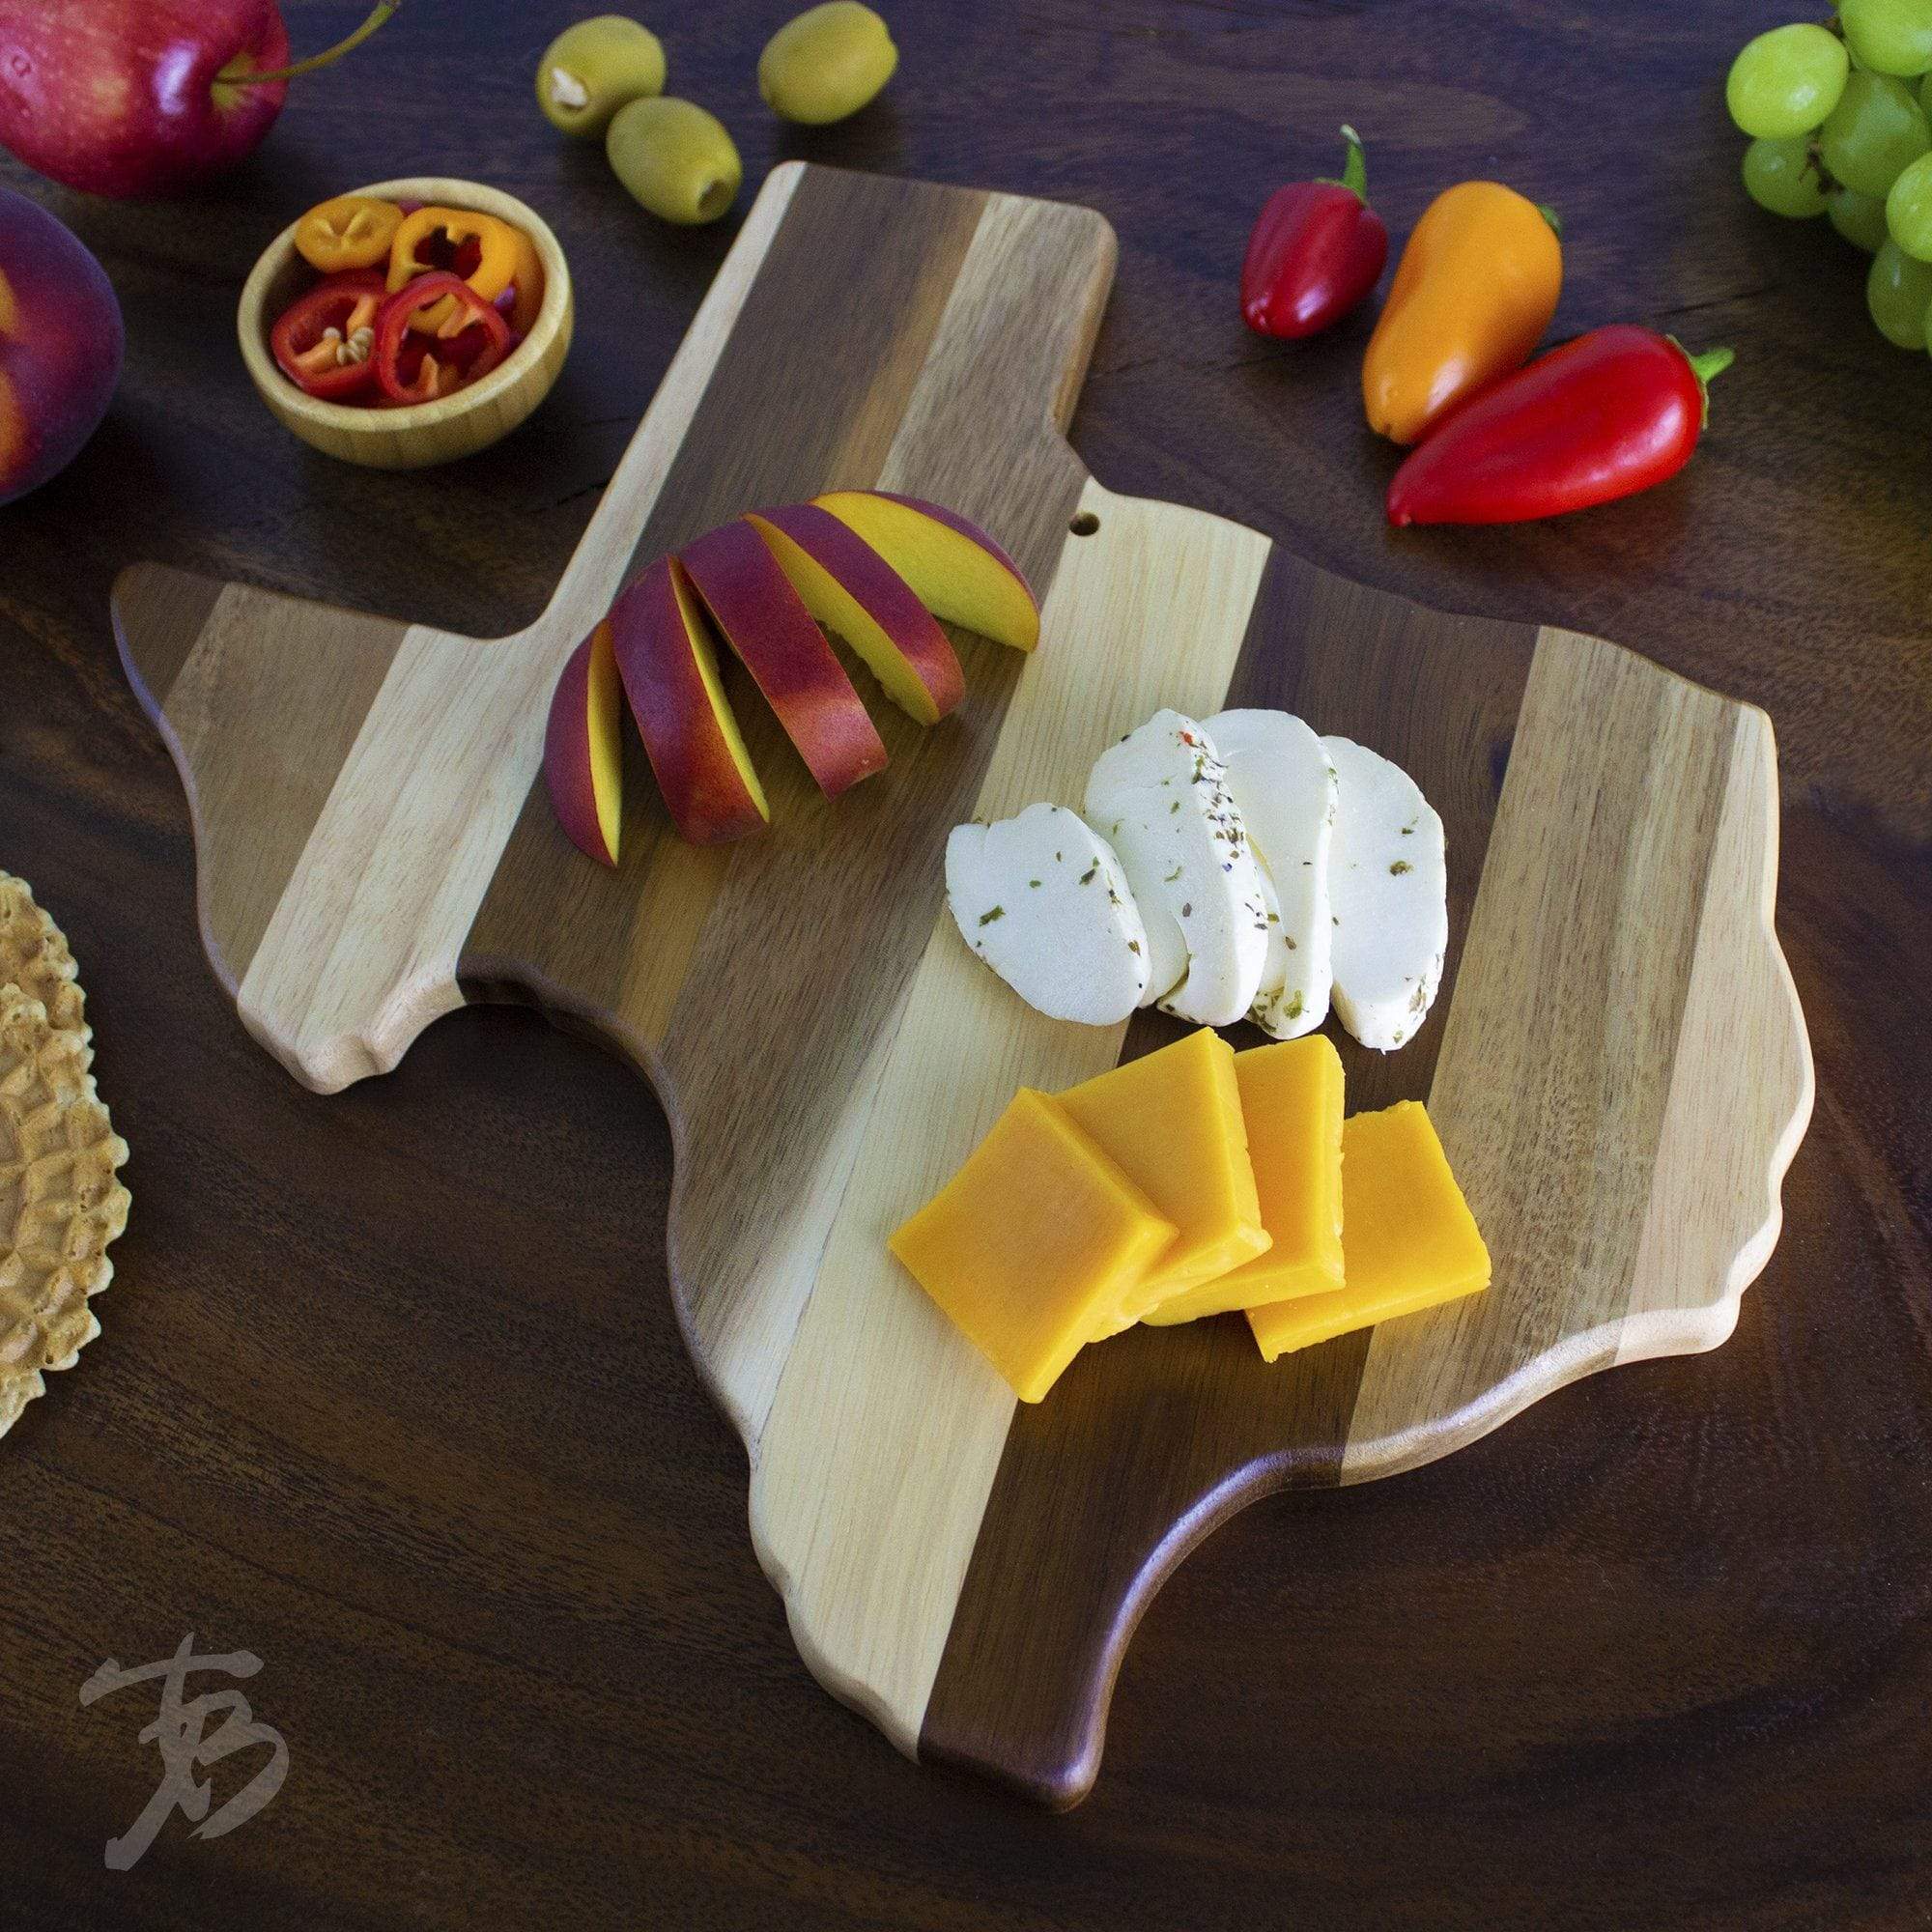 Totally Bamboo Rock & Branch® Shiplap Series Texas State Shaped Wood Serving and Cutting Board